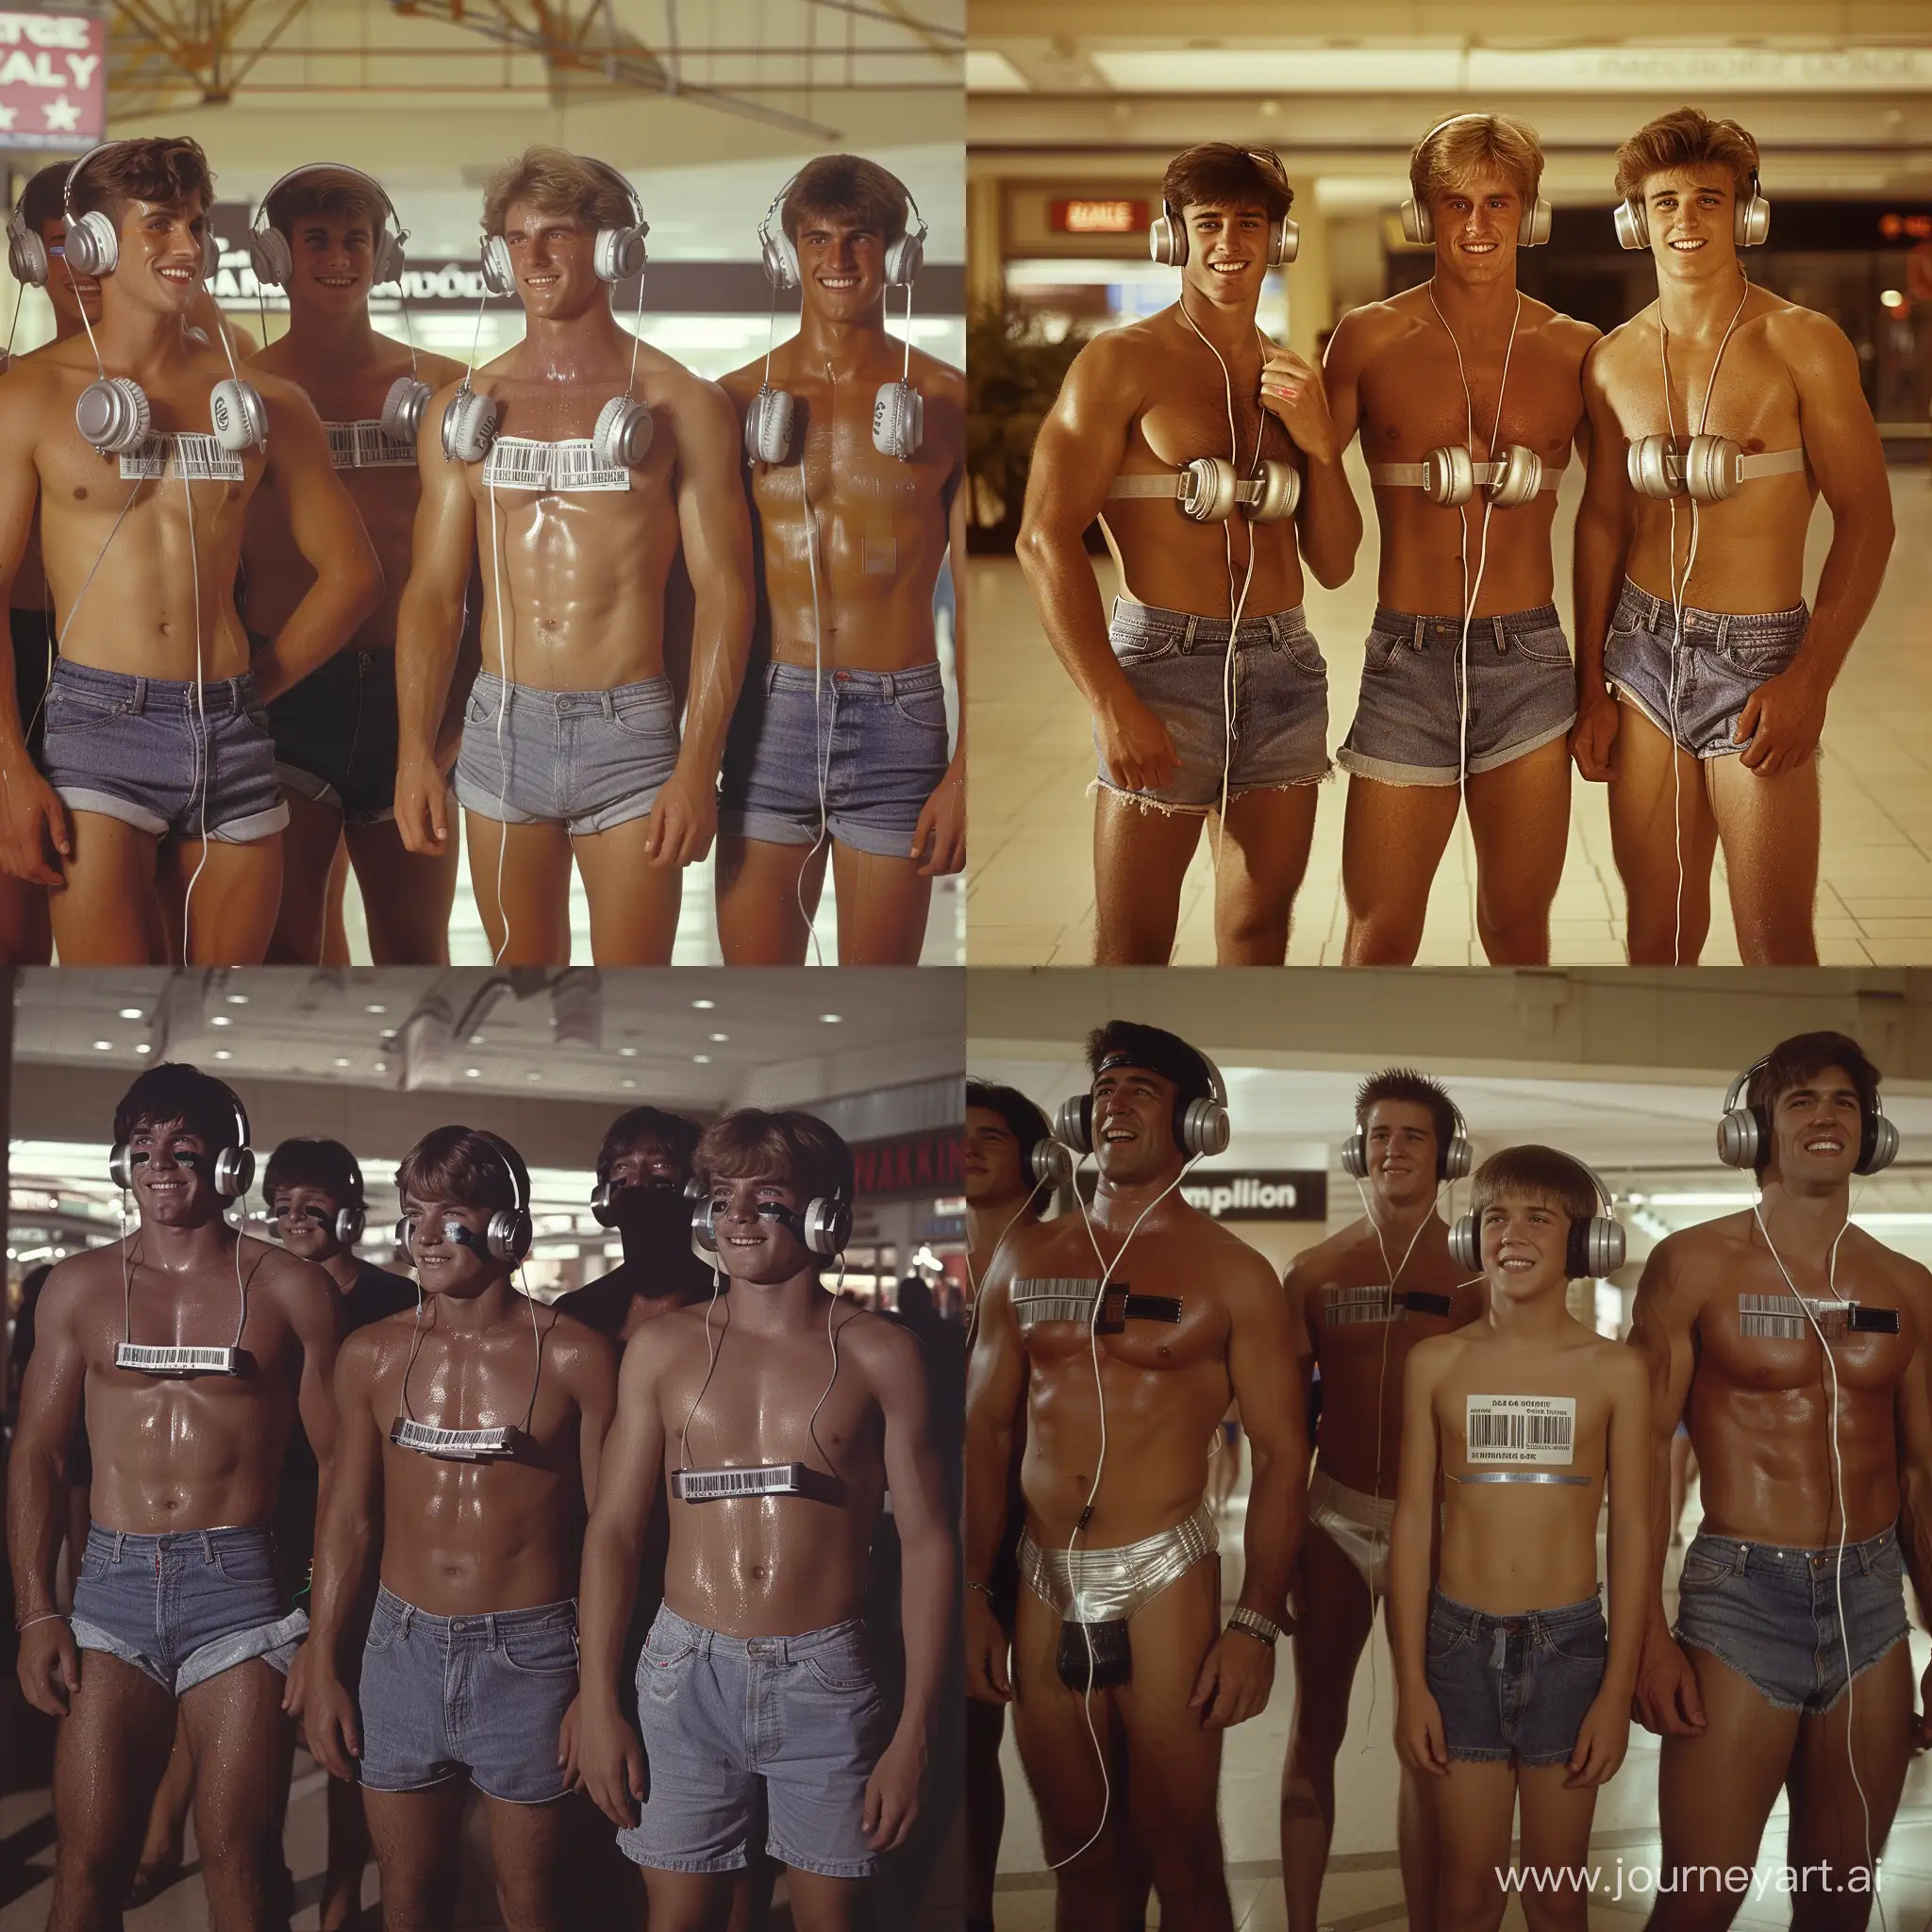 Muscular-Men-and-College-Boys-with-Silver-Headphones-in-1980s-Mall